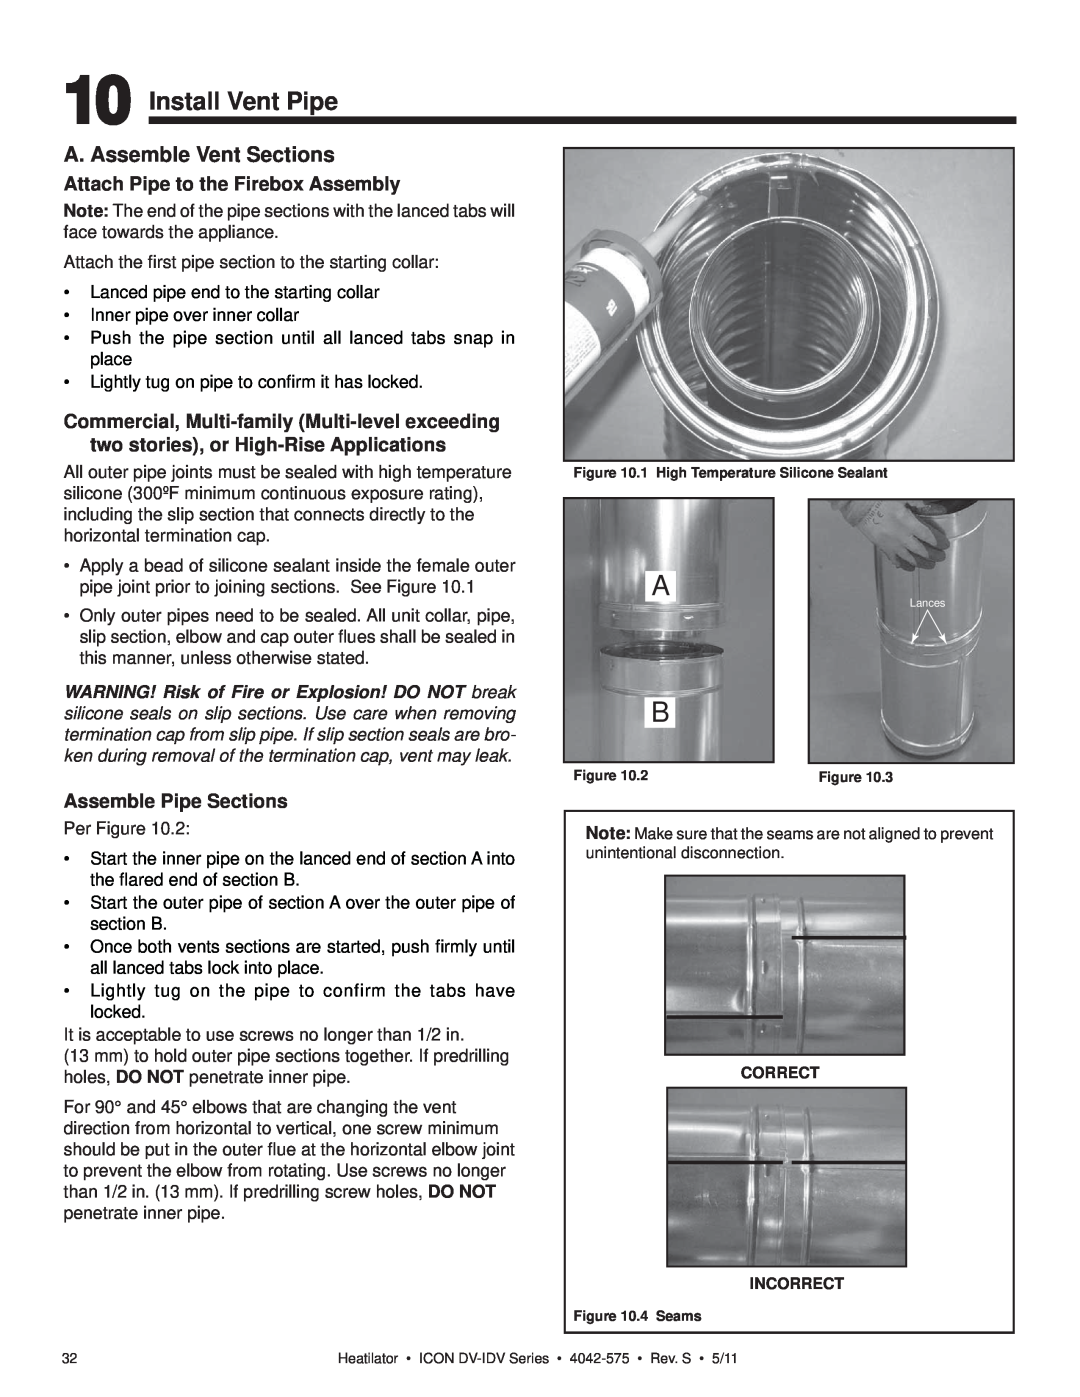 Heatiator IDV4833IT owner manual Install Vent Pipe, A. Assemble Vent Sections, Attach Pipe to the Firebox Assembly 